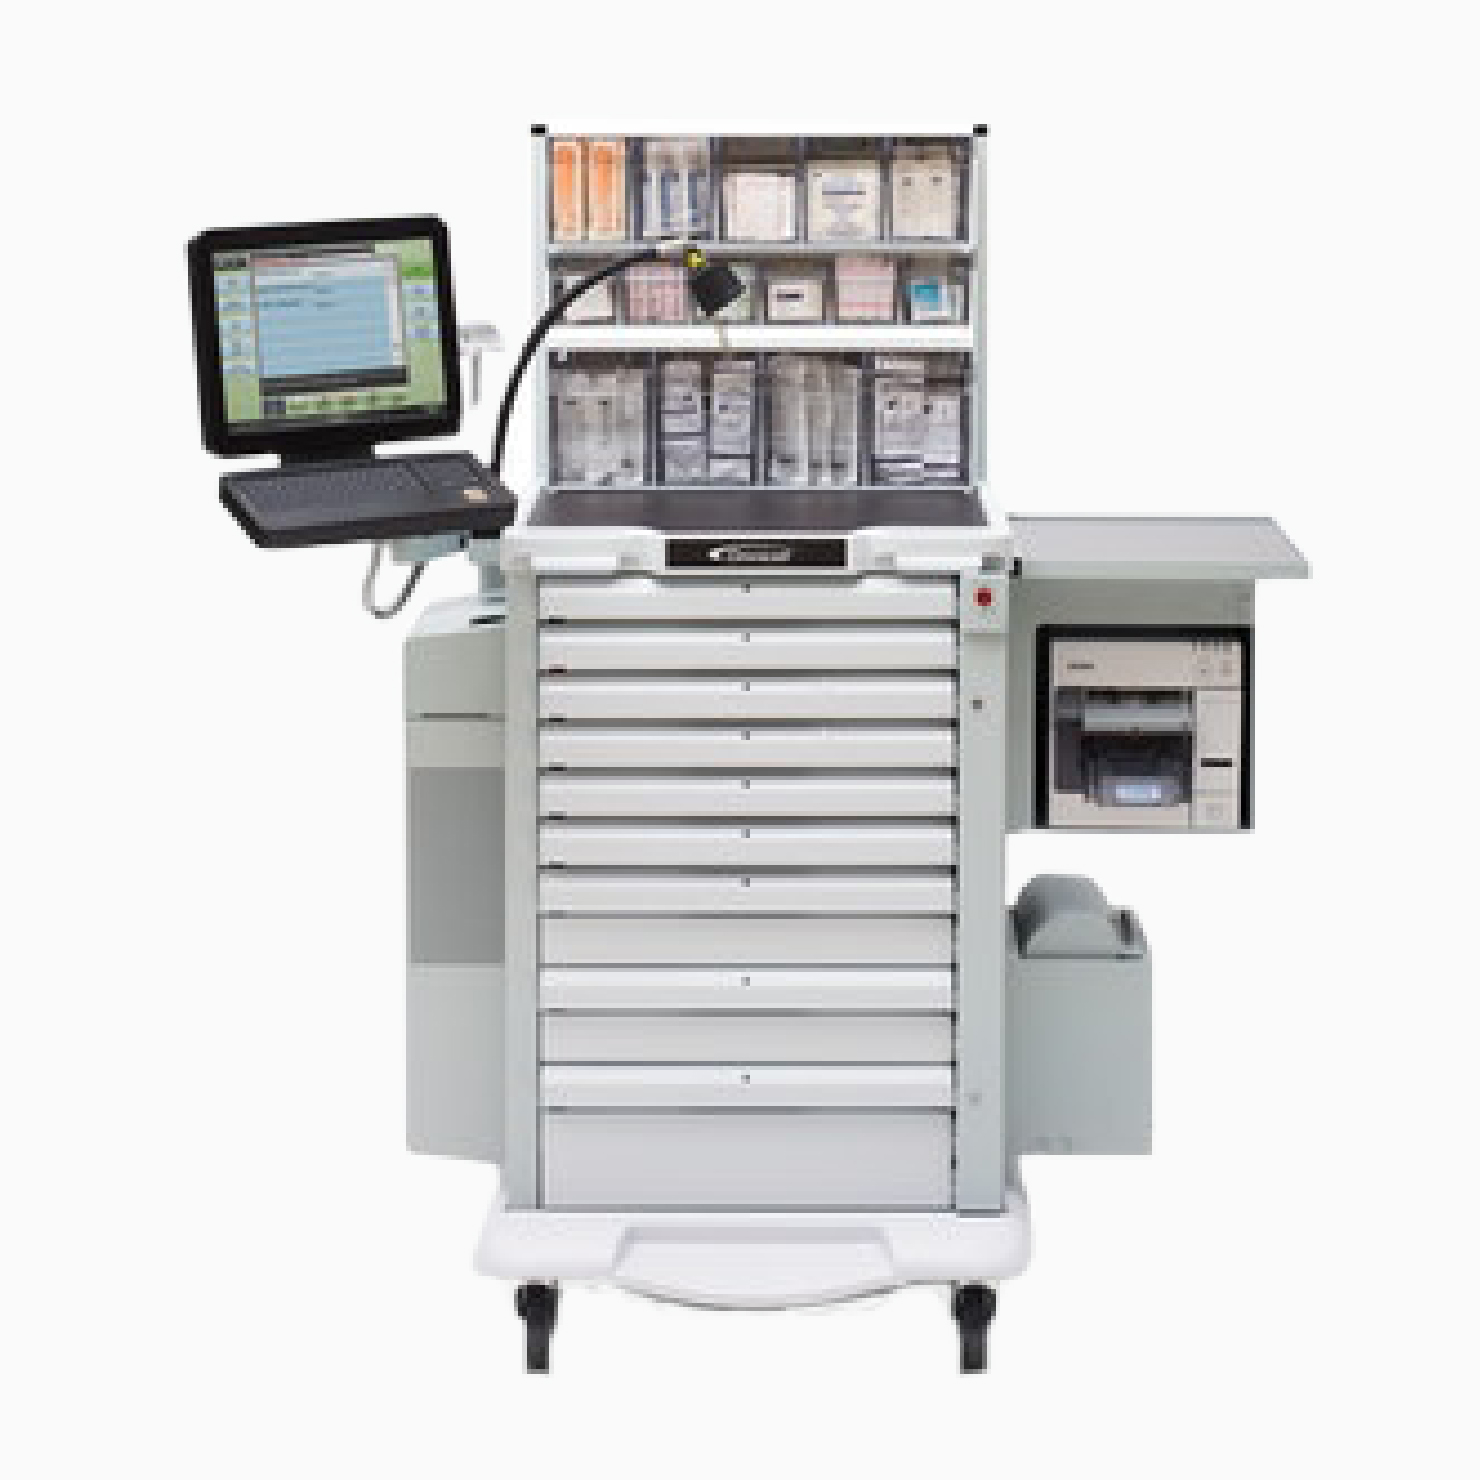 Image of the XT Anesthesia Workstation